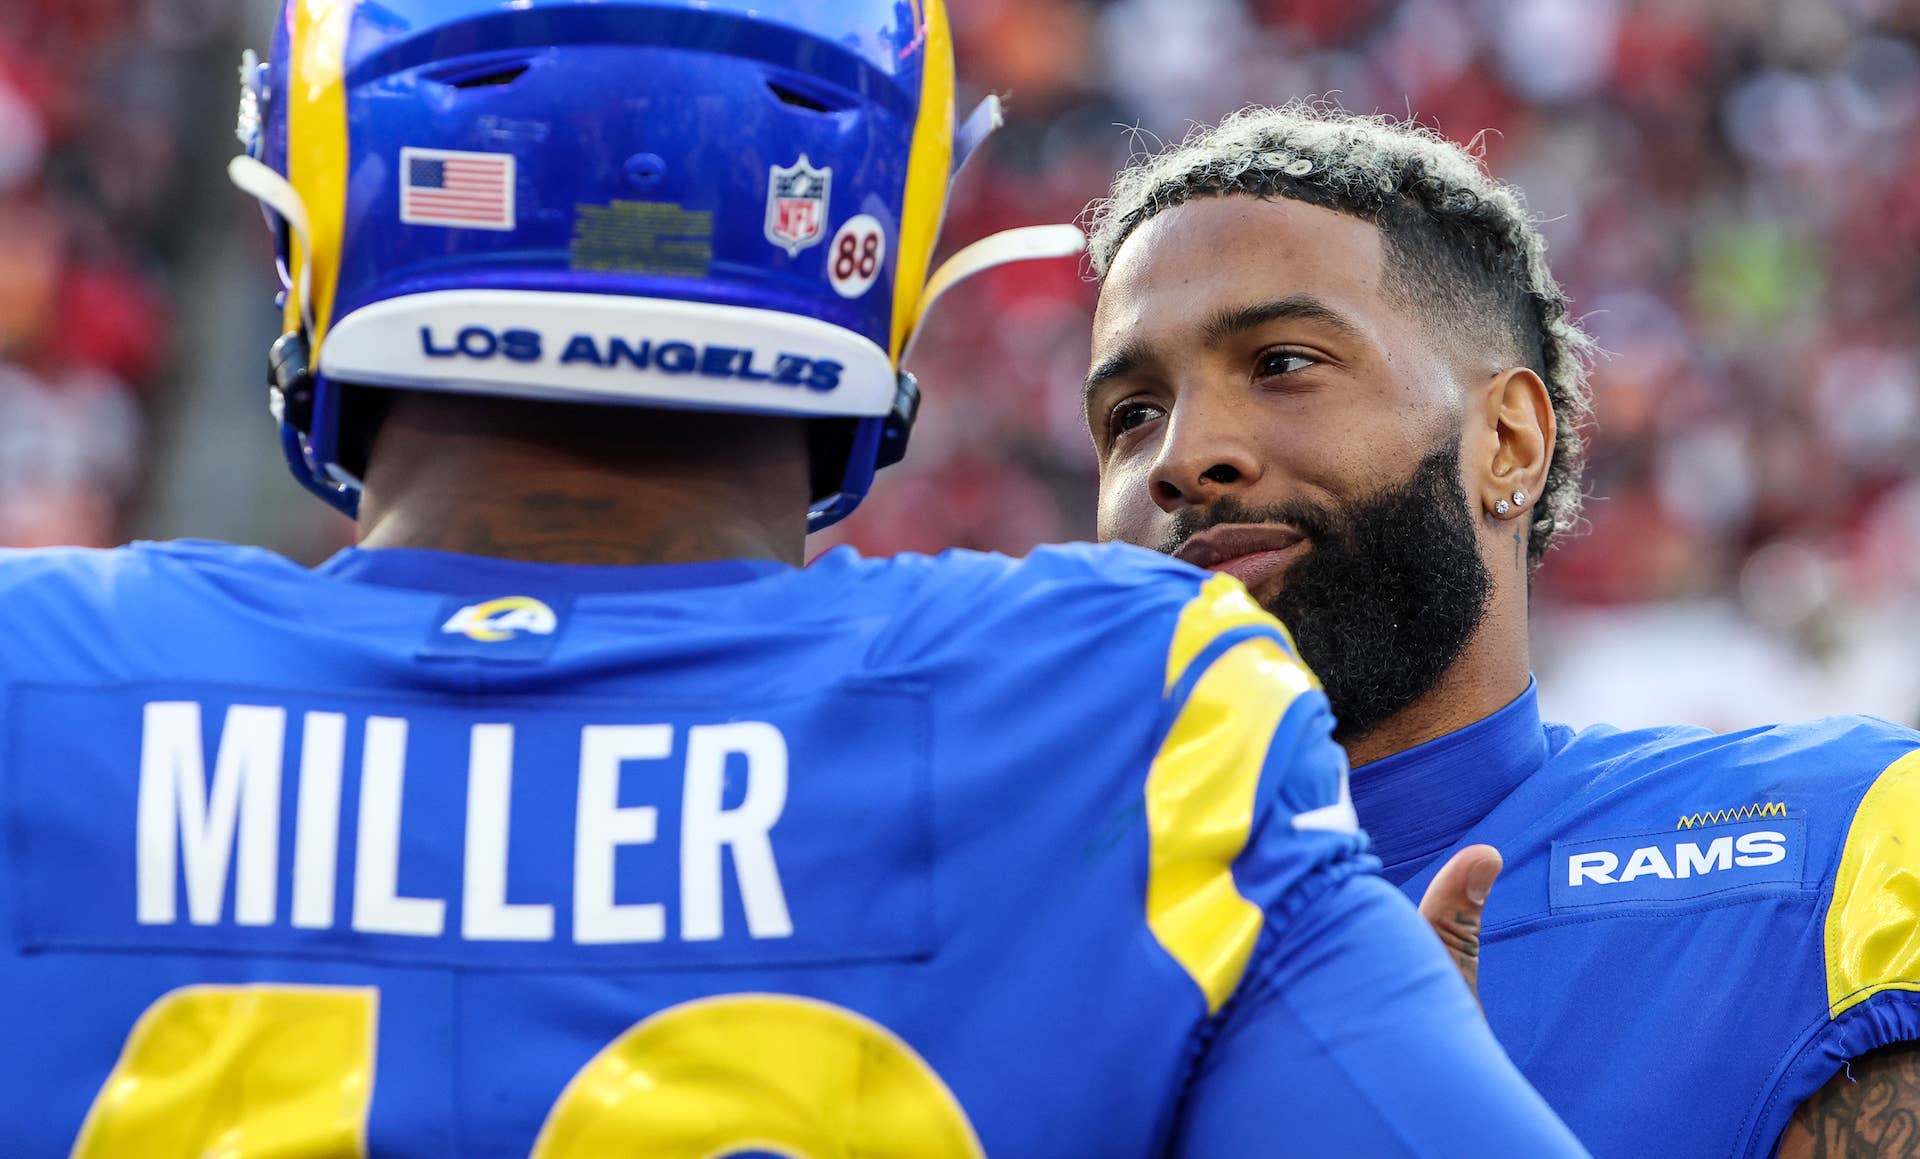 Odell Beckham Jr. and Von Miller during the Los Angeles Rams' game against the Tamba Bay Buccaneers